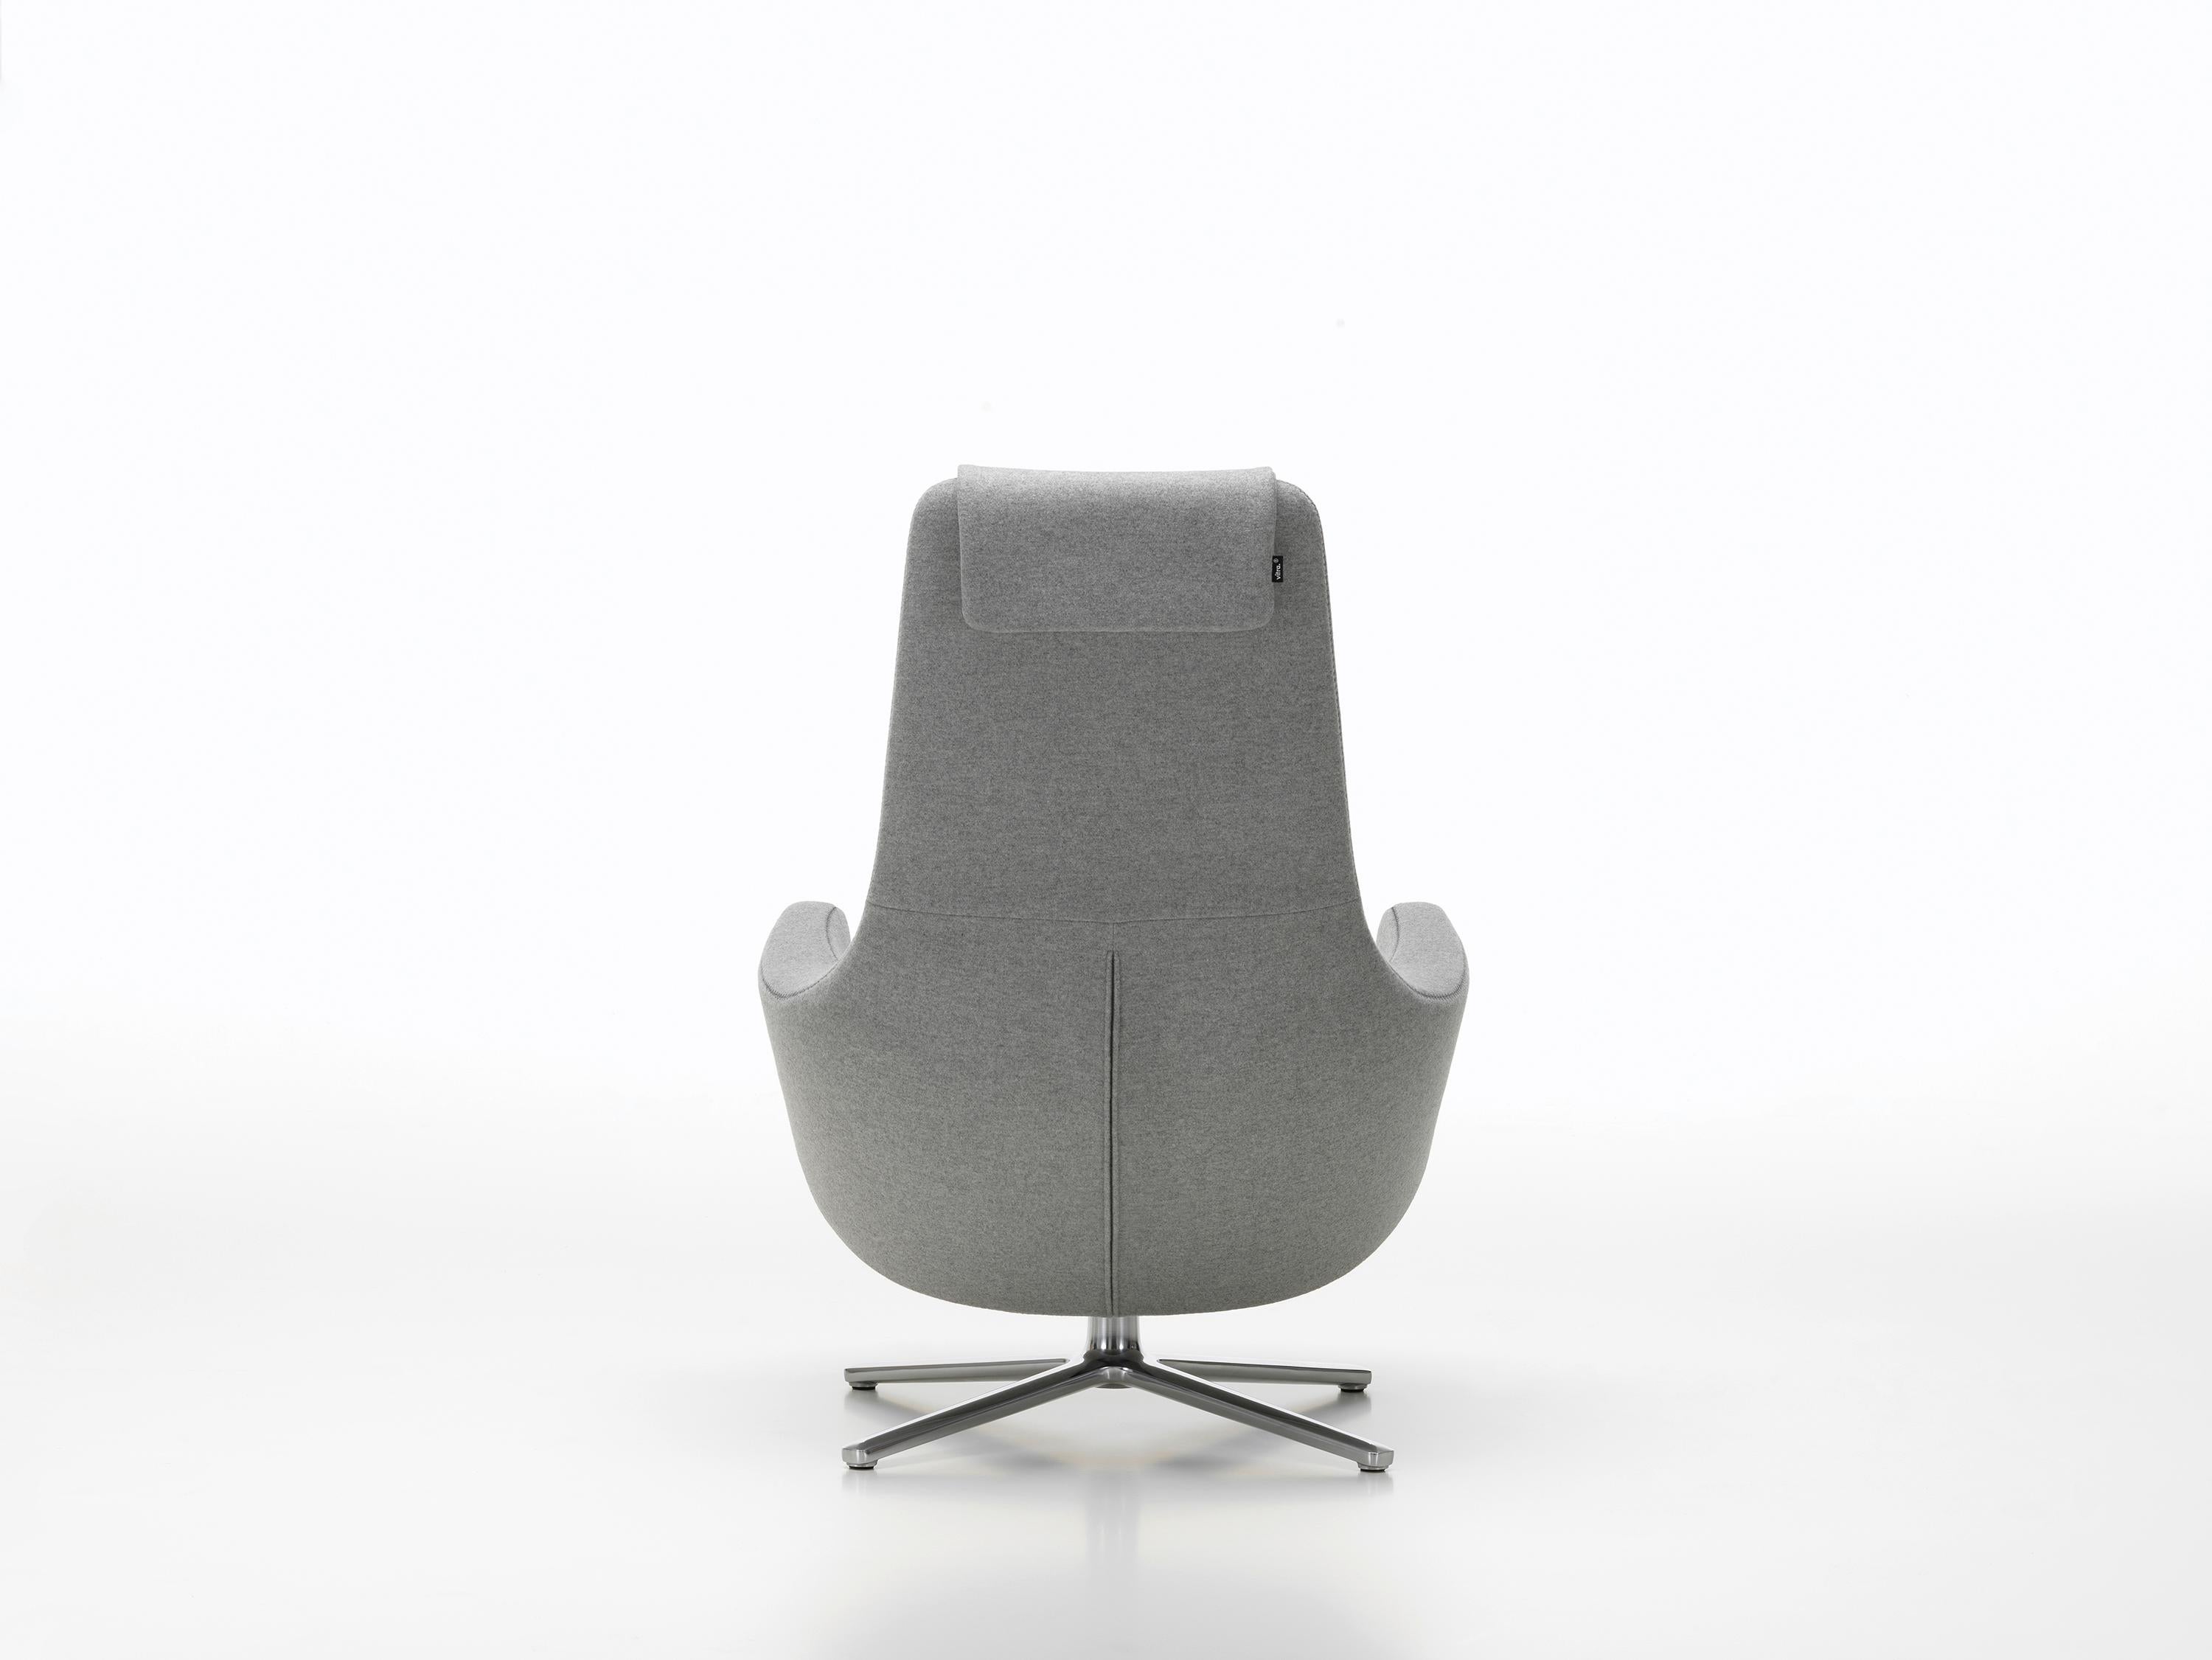 These items are currently only available in the United States.

The large and exceptionally comfortable Repos armchair is available with fabric or leather covers, in a selection of colors. Thanks to it's elegantly understated design, it is perfectly